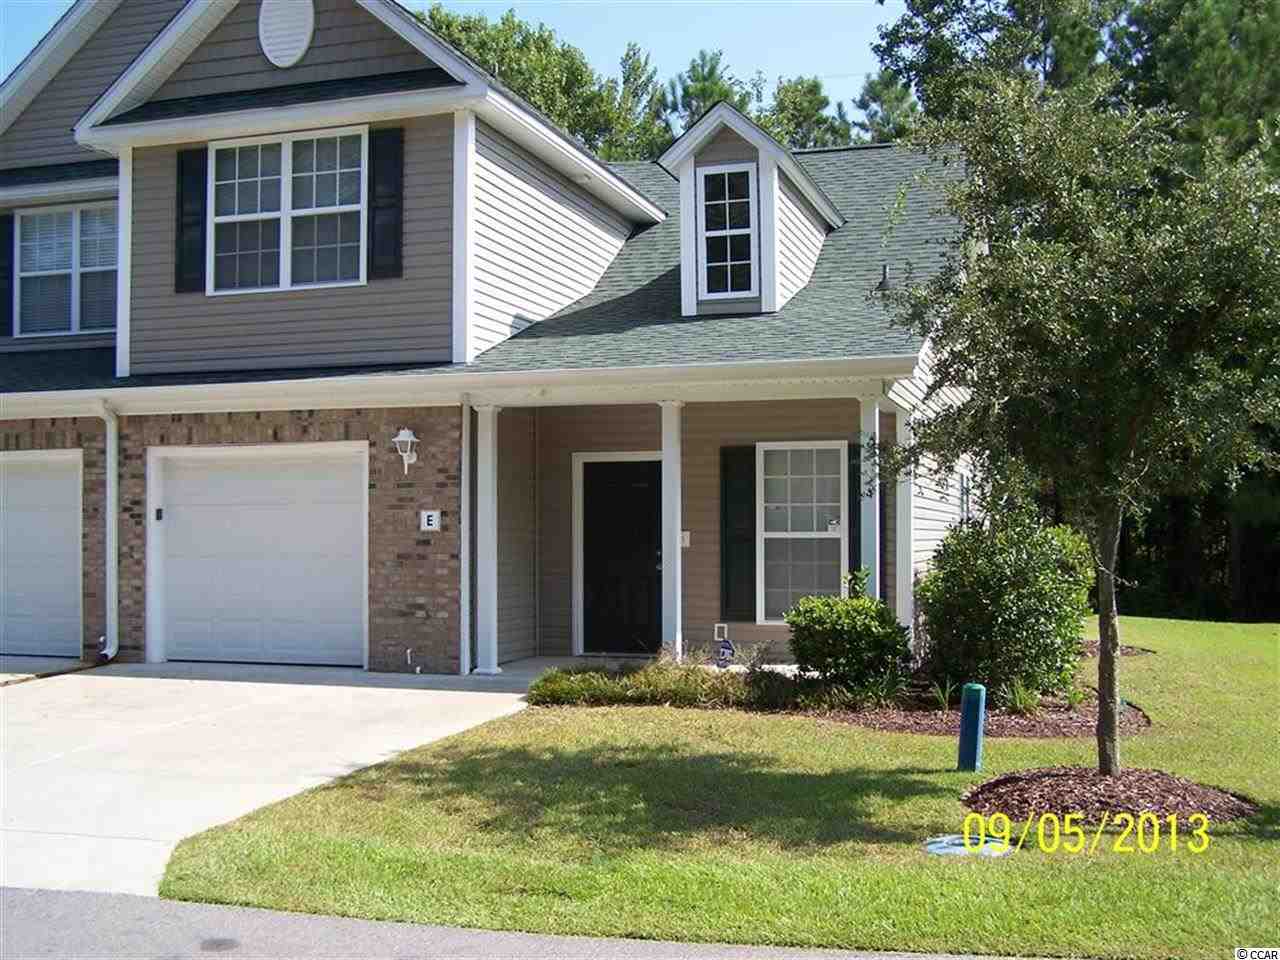 751 Painted Bunting Dr. UNIT 53 E Murrells Inlet, SC 29576